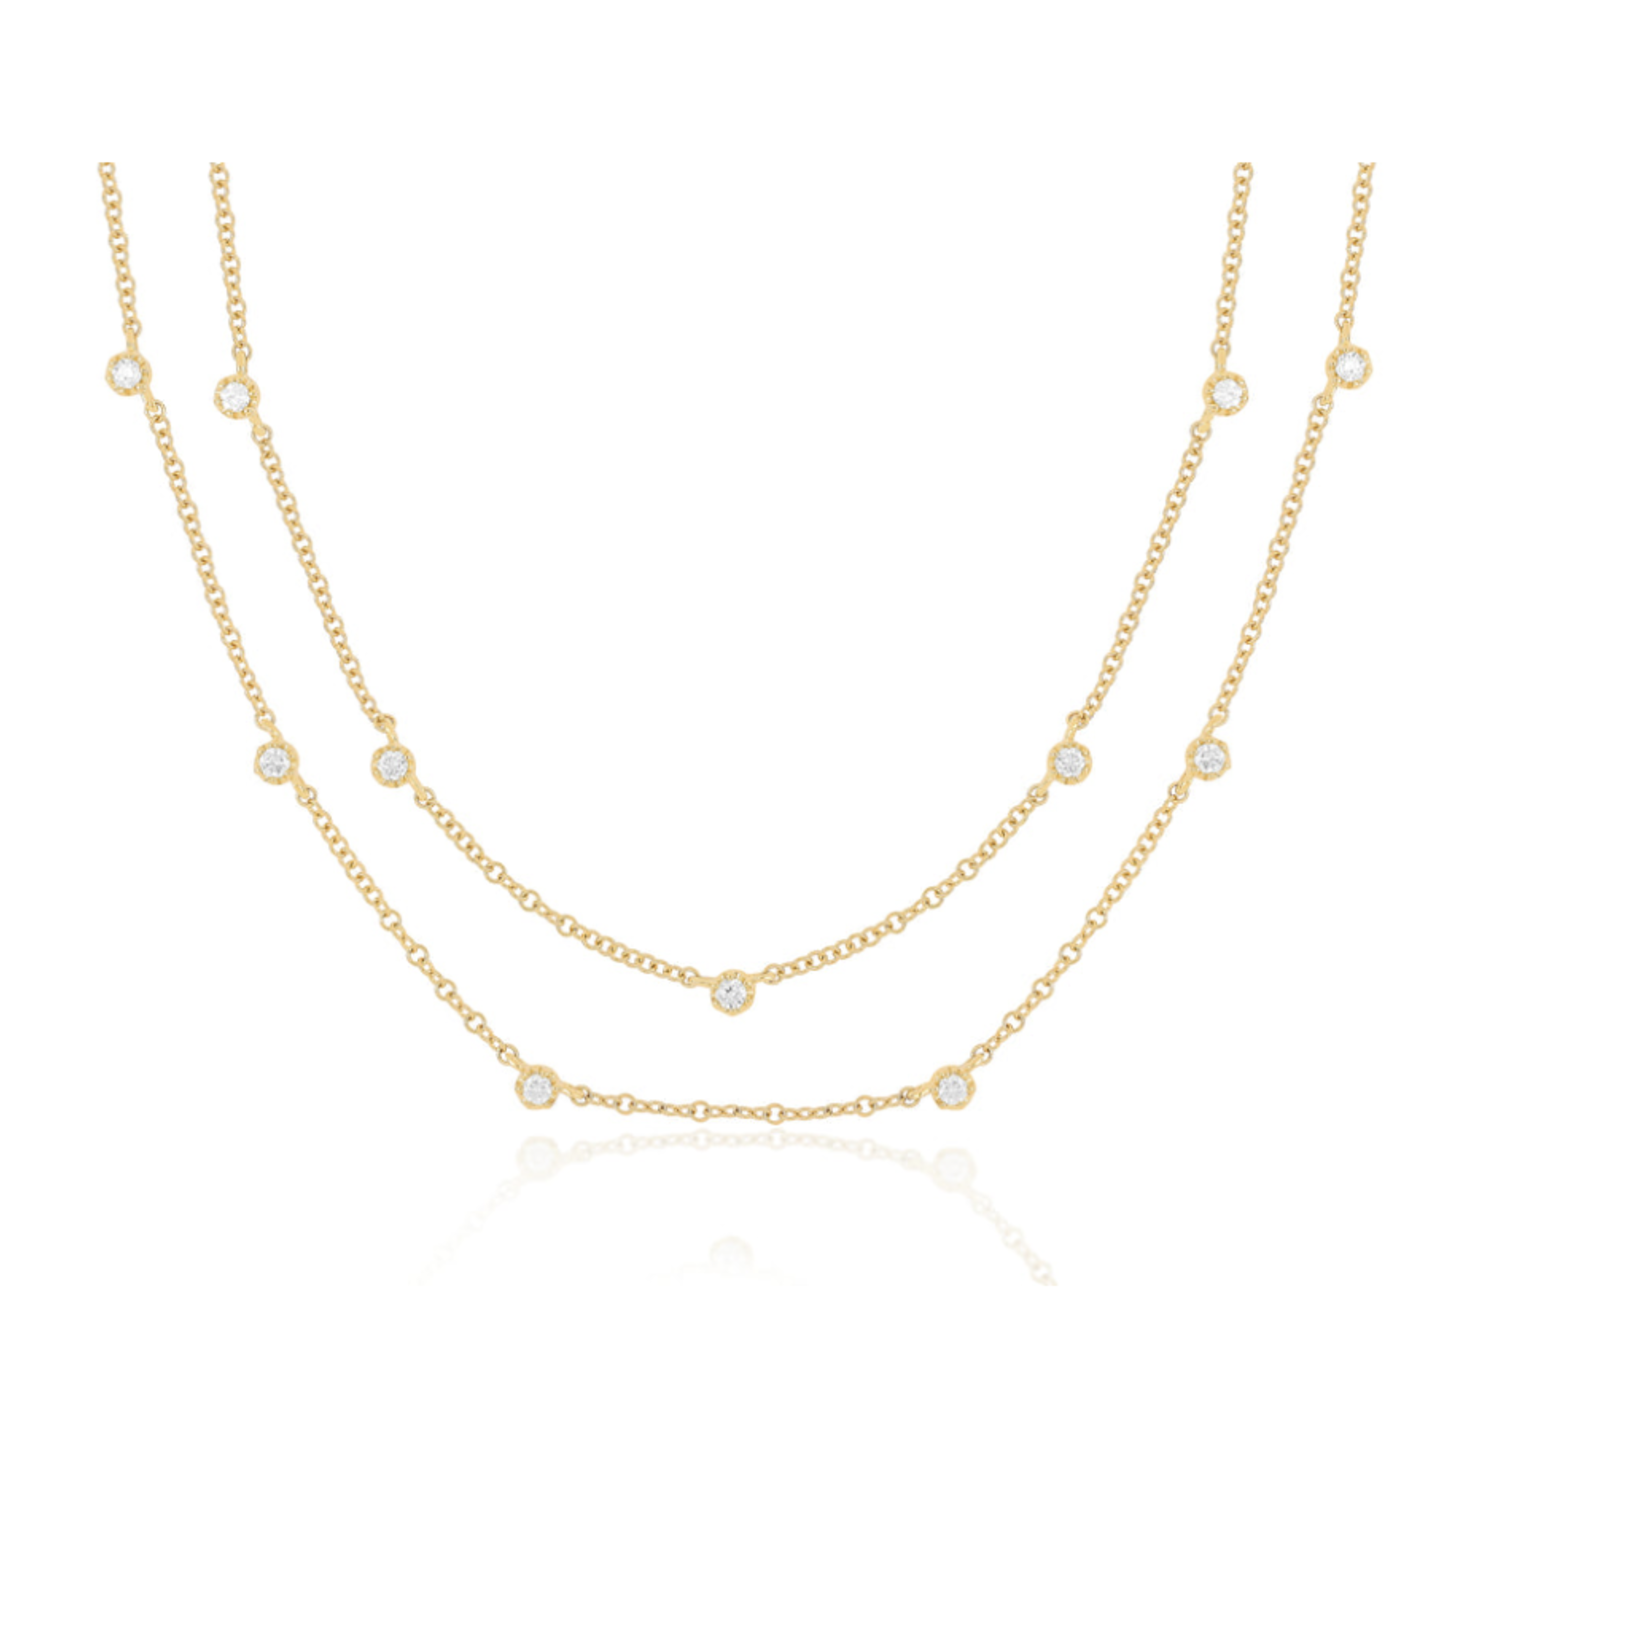 EF COLLECTION 14KY Diamond Crown Double Strand Necklace